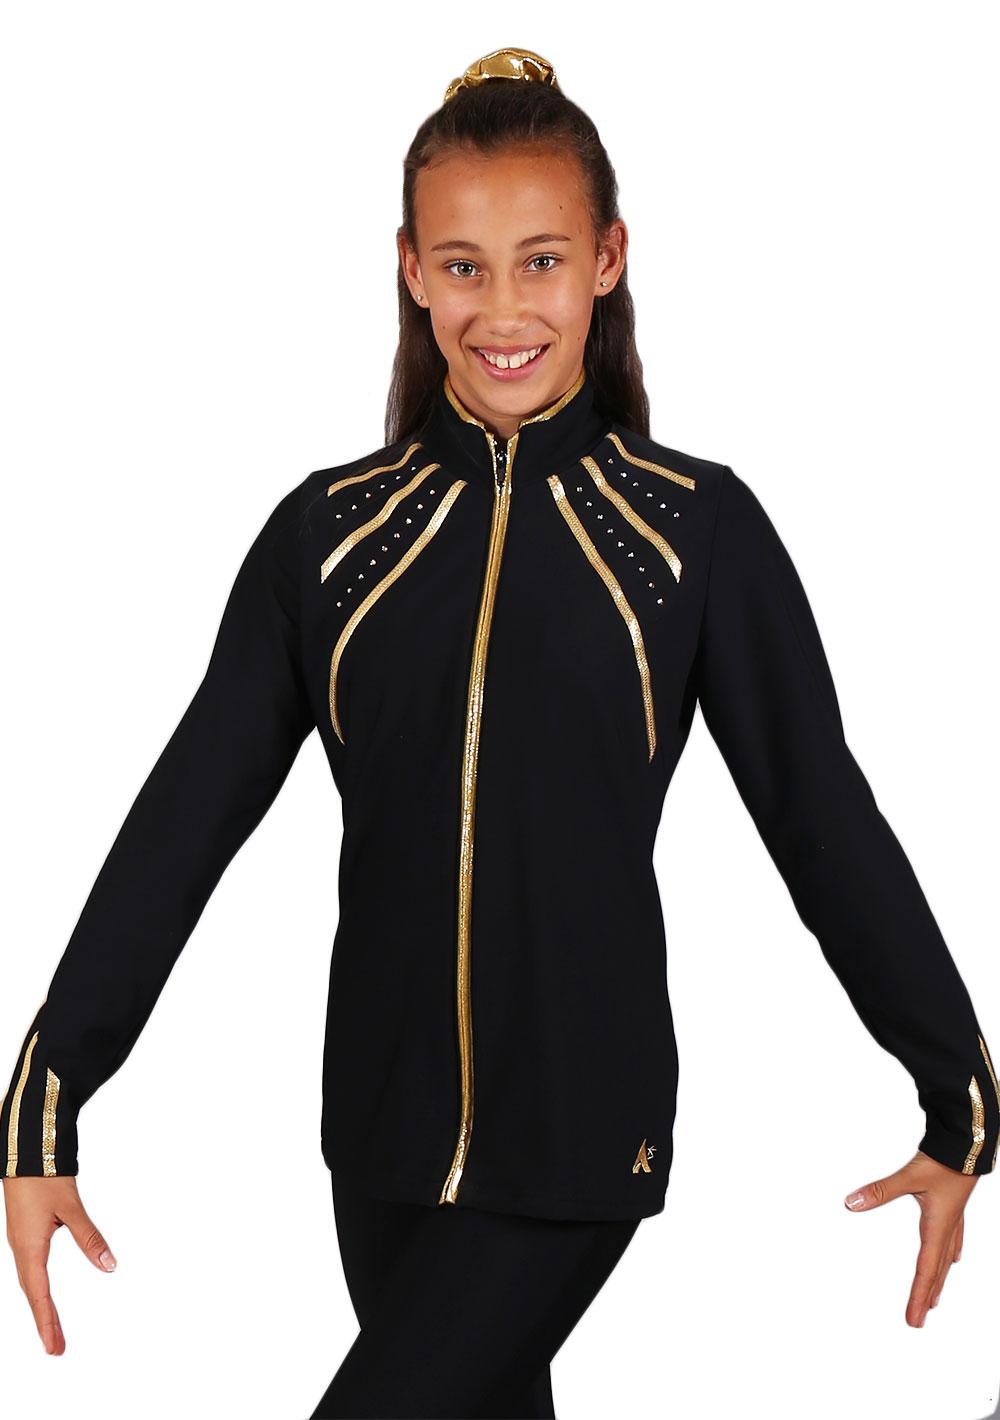 TS40 Tracksuit Jacket: in Black with Gold Shimmer stripes - A Star Leotards